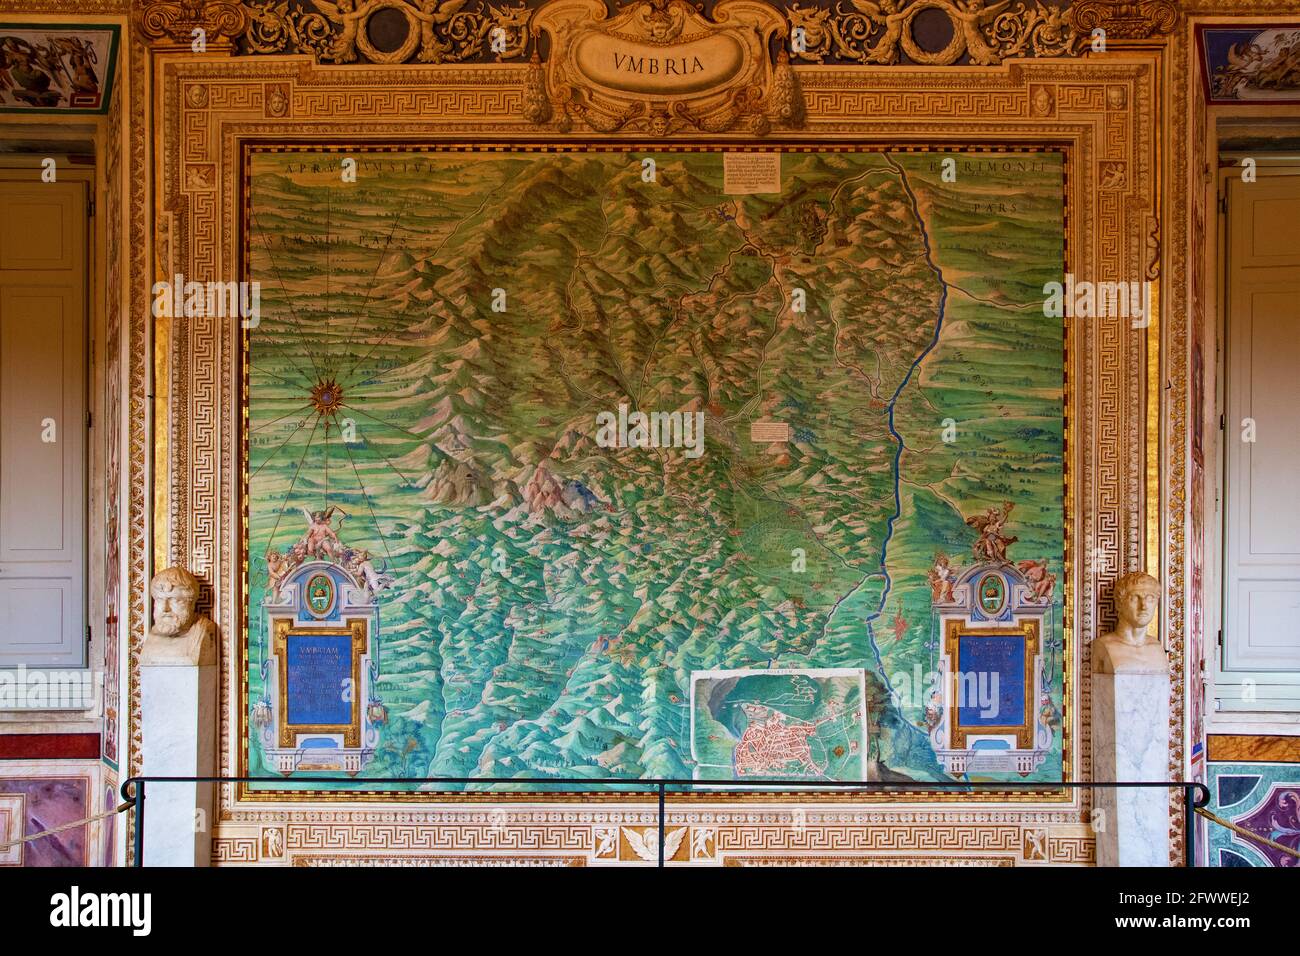 Ancient map of Umbria painted on a wall in Musei Vaticani, Rome Stock Photo